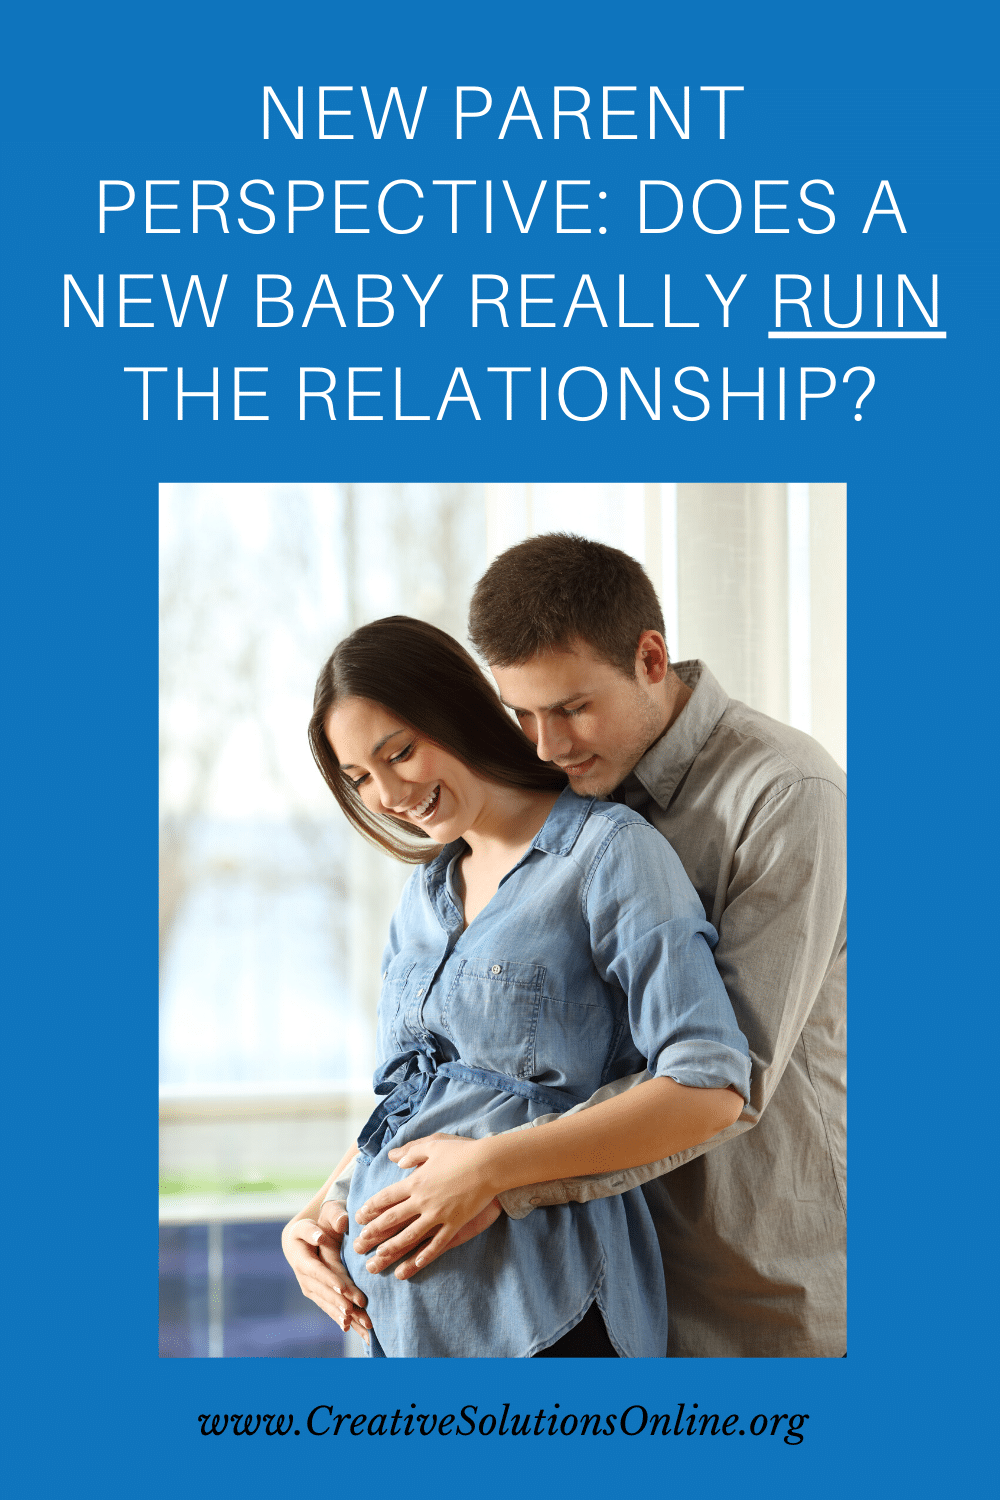 New Parent Perspective: Does Having a Baby Really Ruin a Marriage?